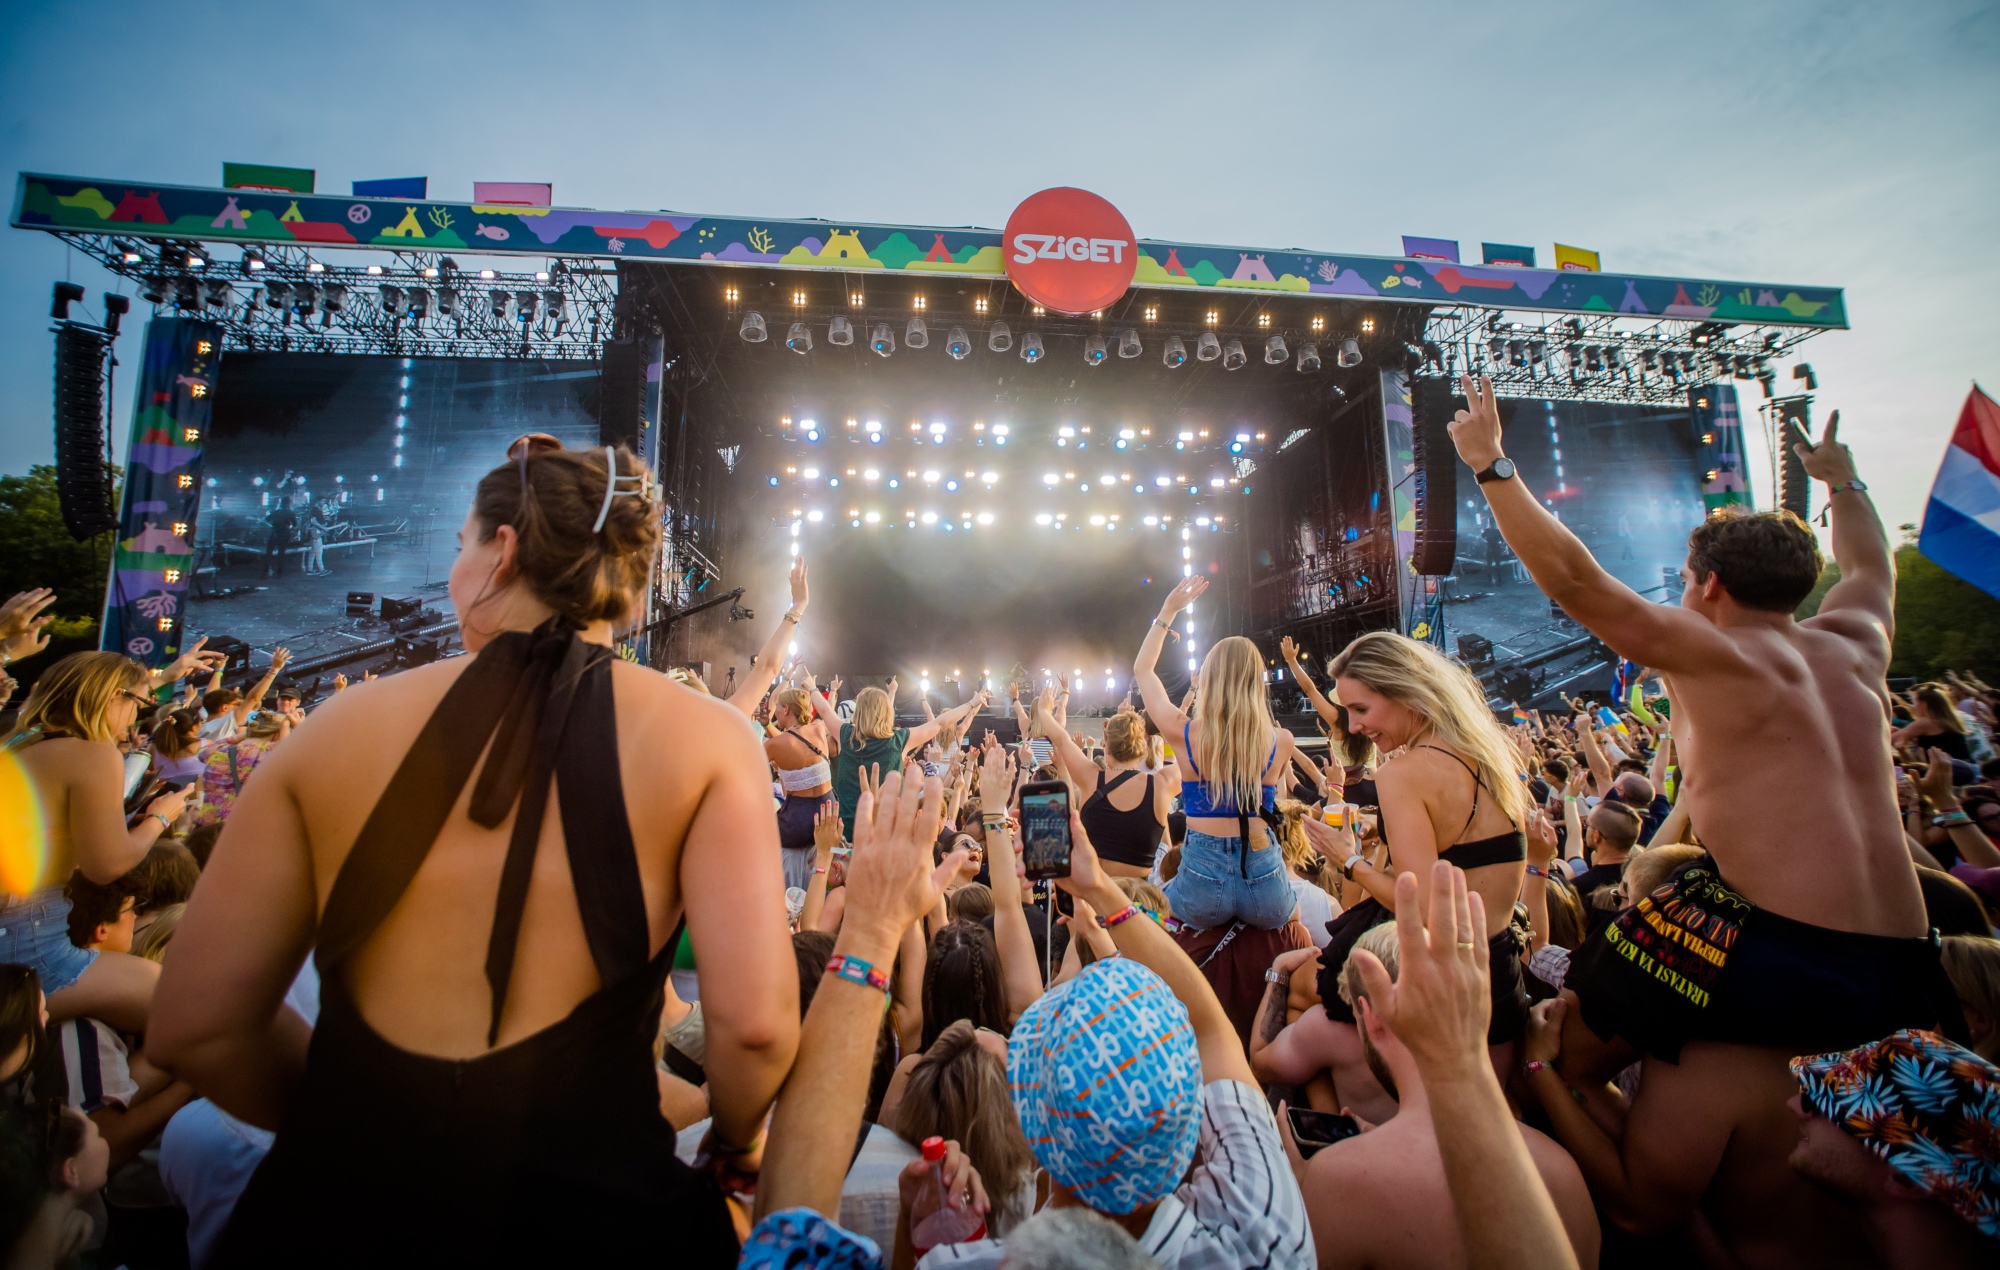 Gladiatorial dance arenas and world-class DJ: what Sziget has in store for electronic music lovers